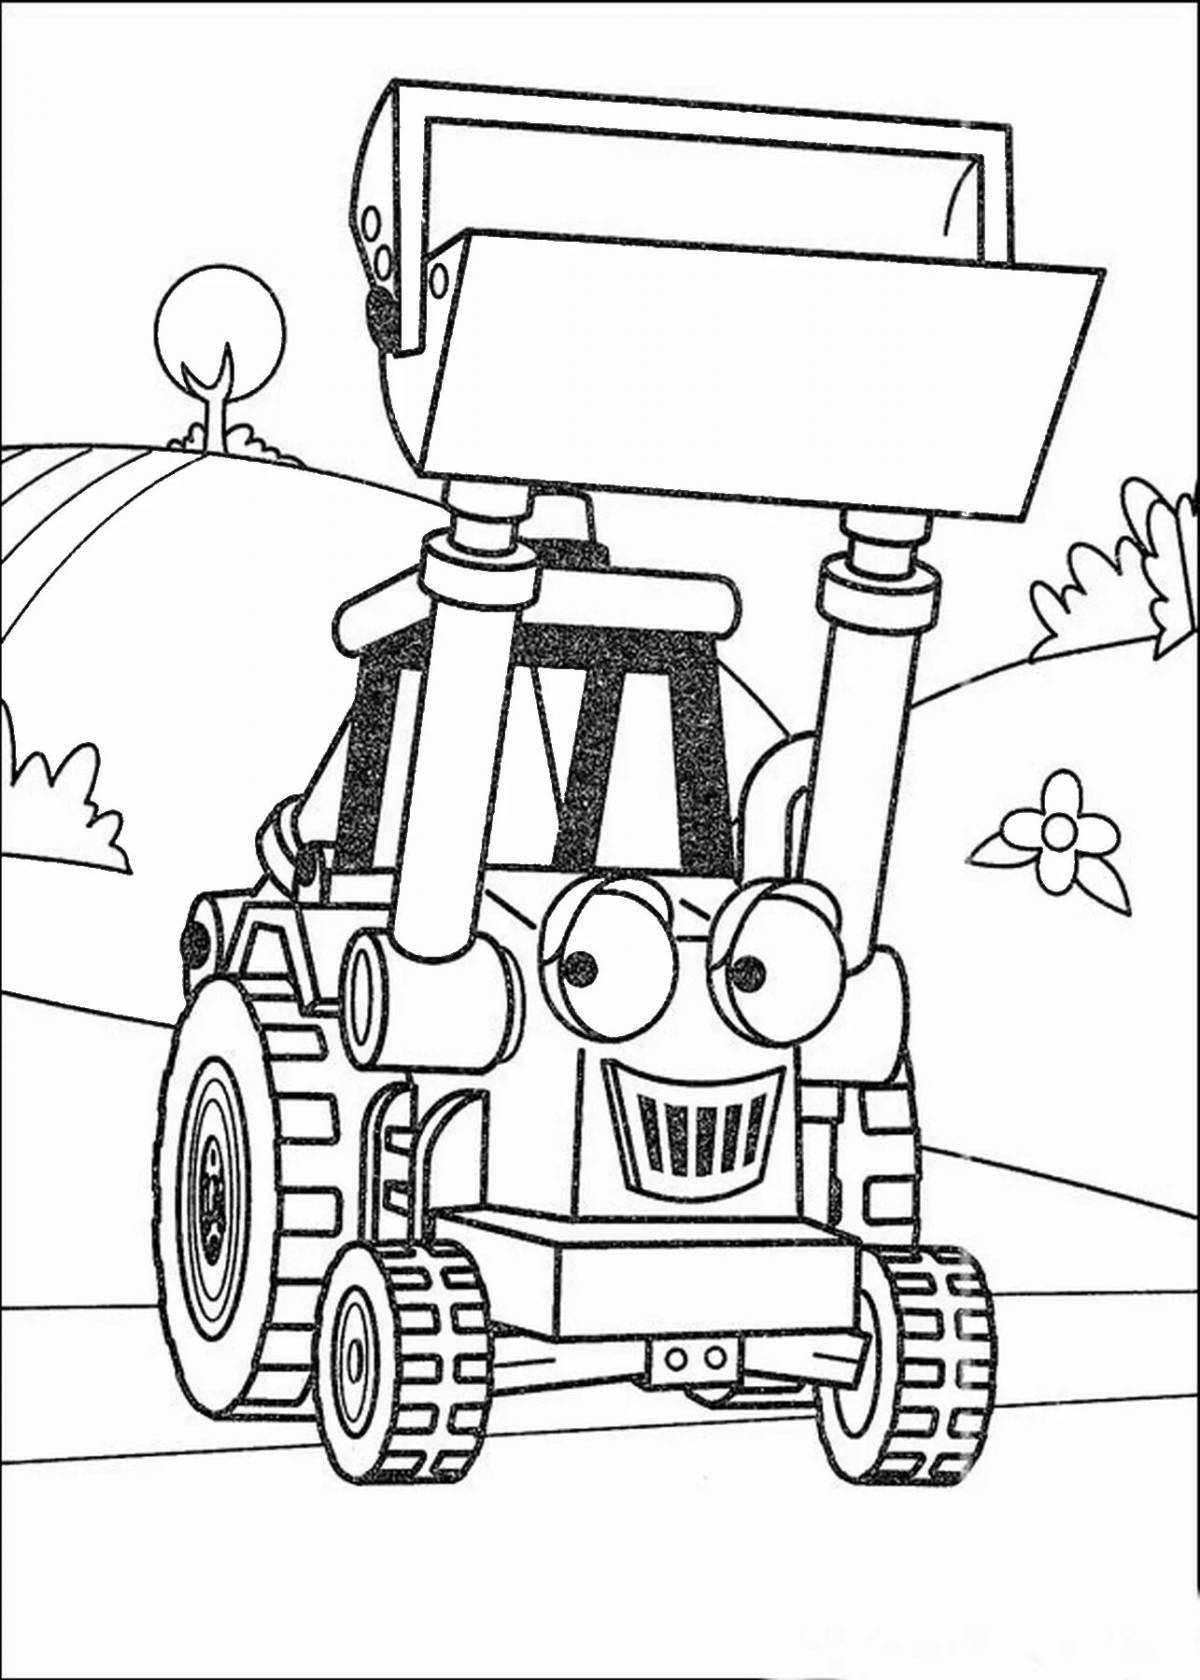 Coloring page adorable tractor robot